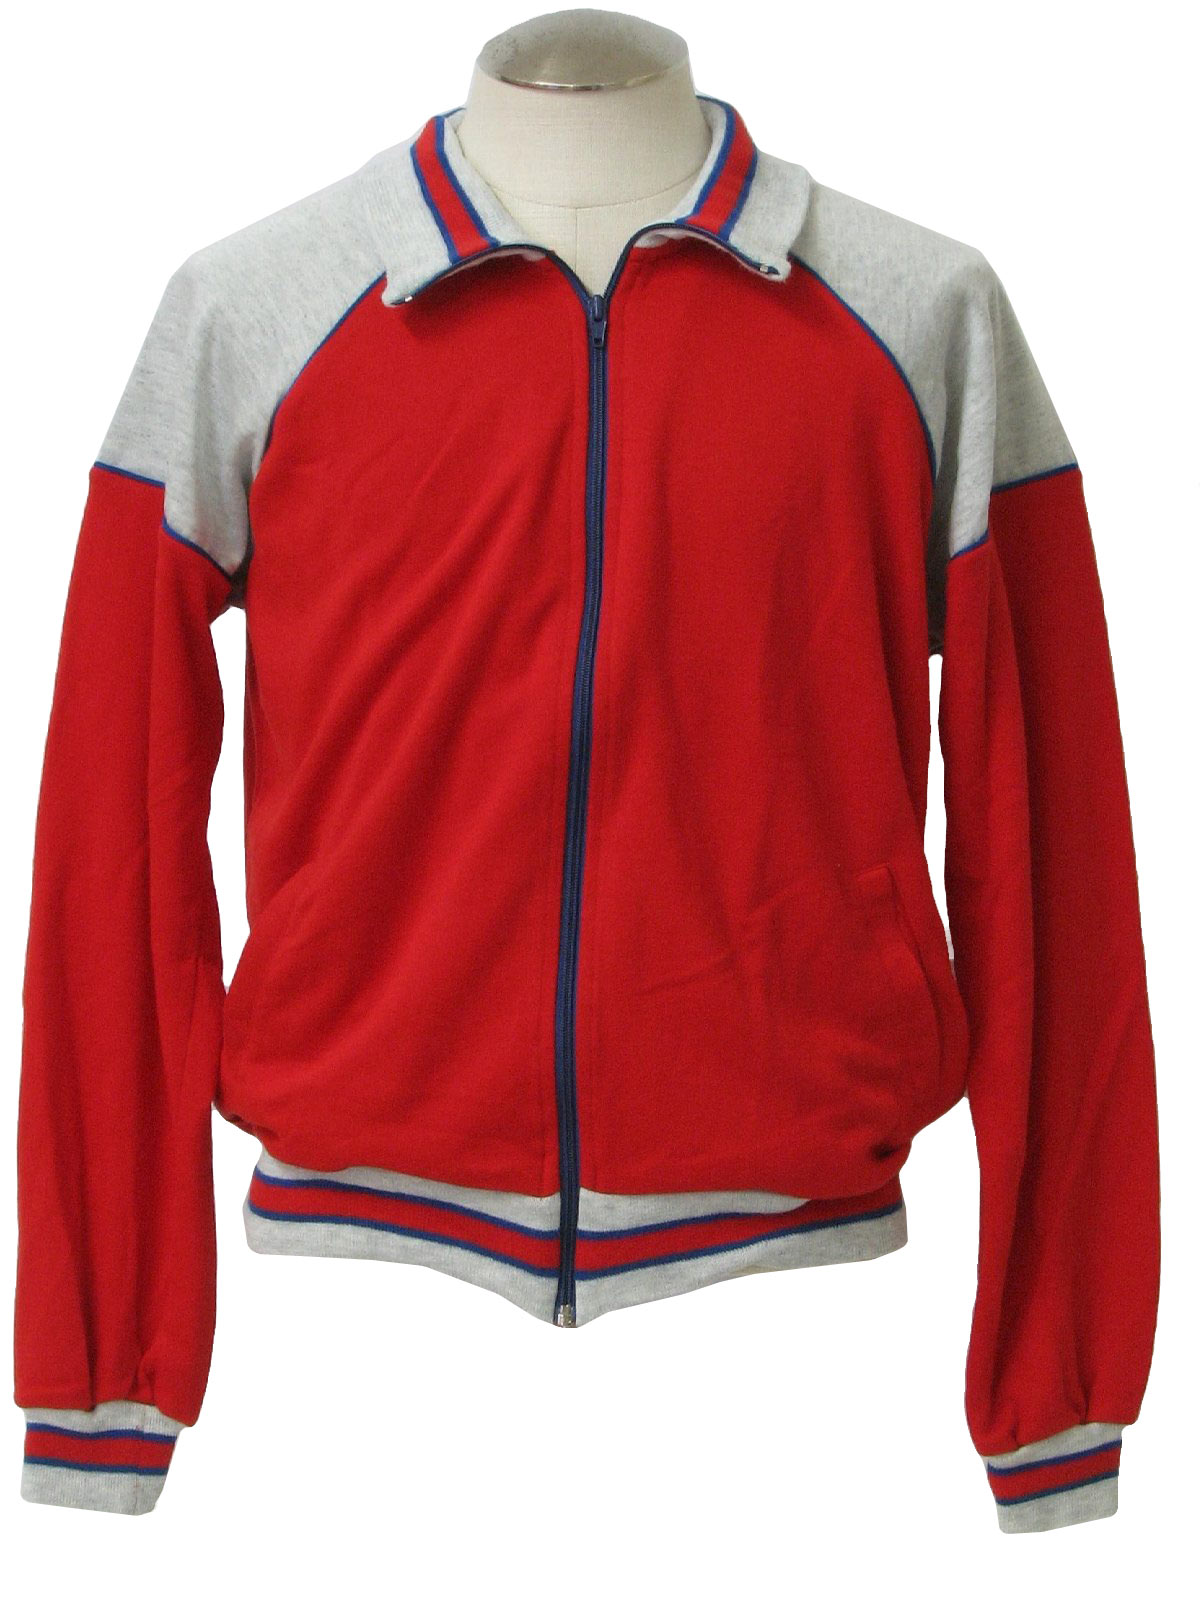 80's Pro Style Jacket: 80s -Pro Style- Mens red and light heathered ...